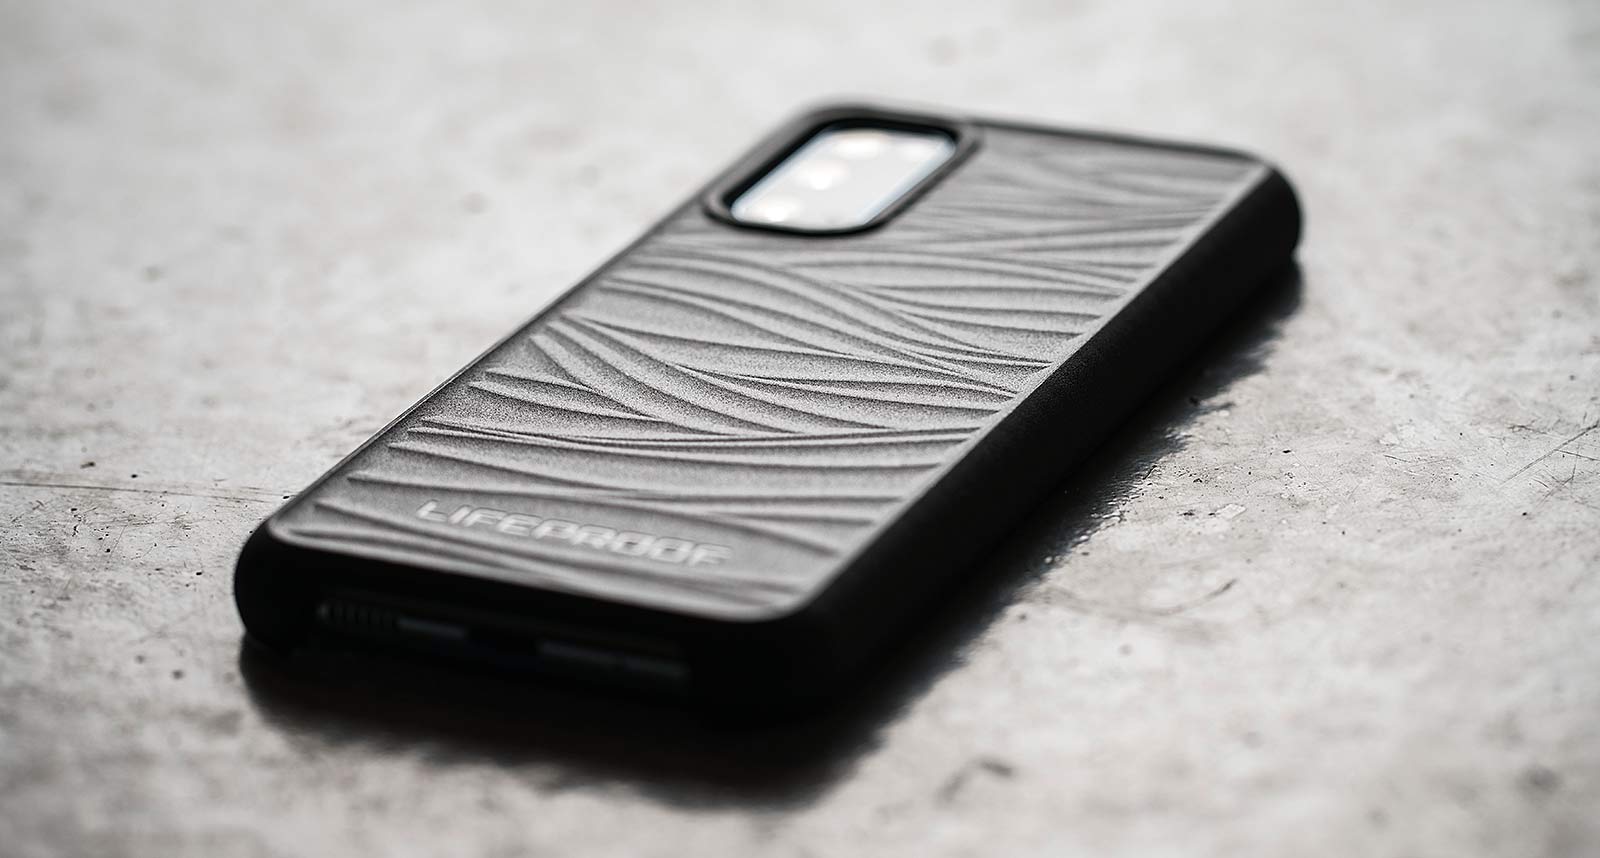 Lifeproof case made with 85% recycled ocean-based plastics